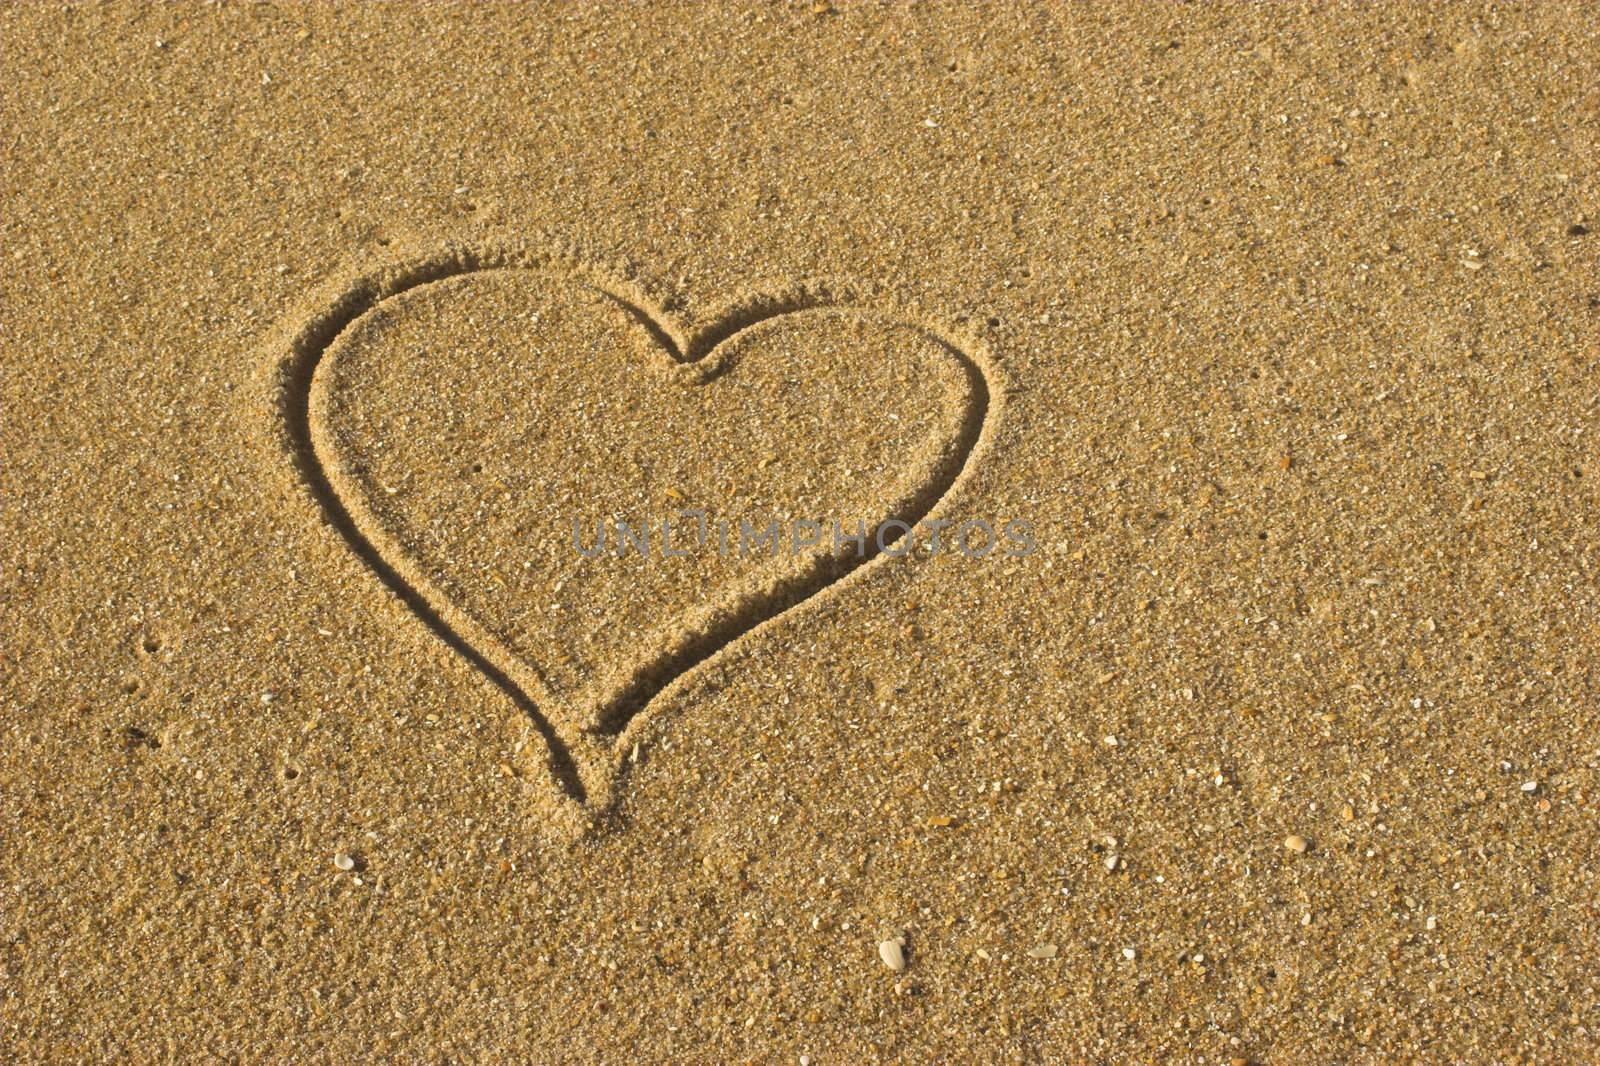 Picture of a Love message on a gold sand